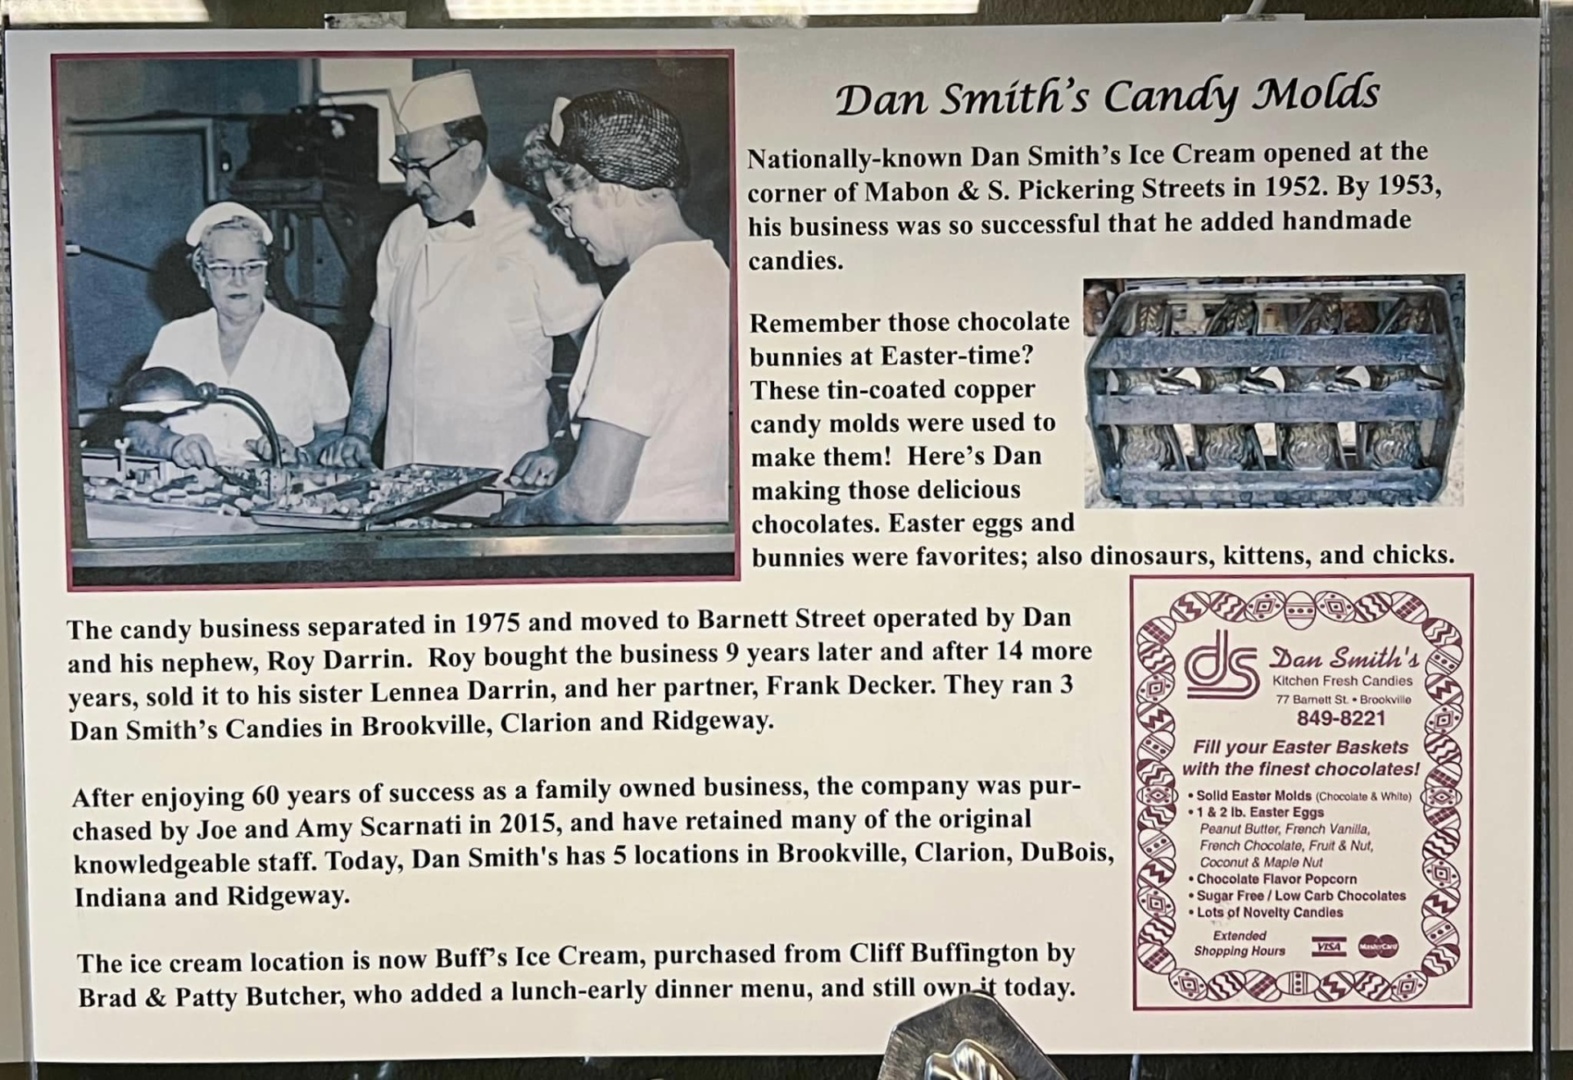 Dan Smith Candy Molds story